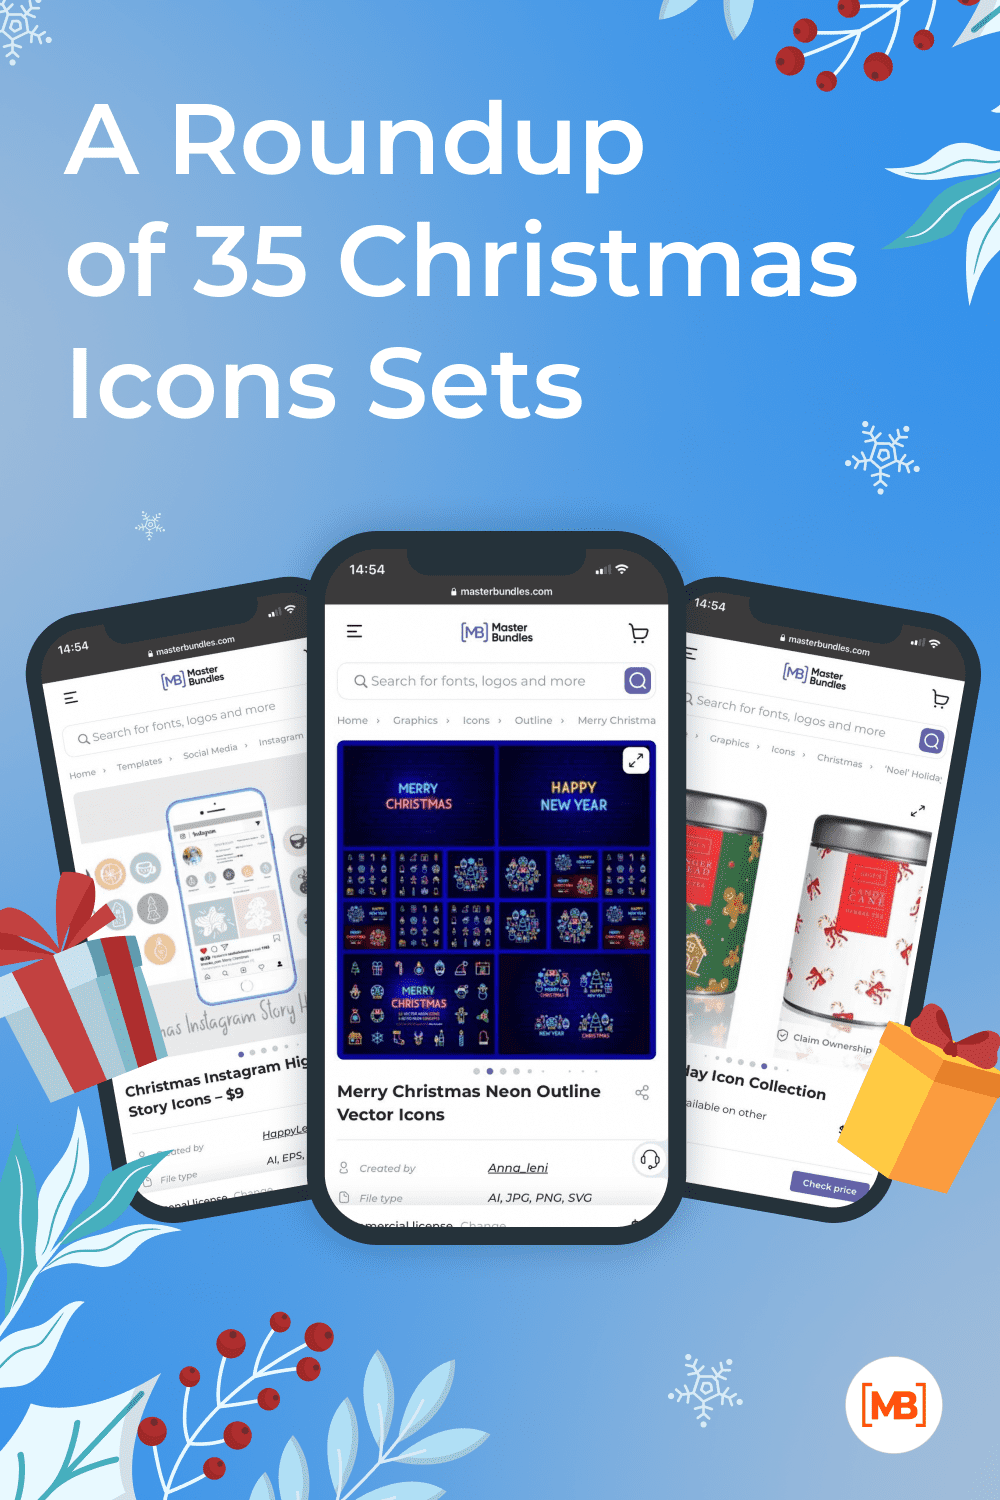 pinterest a roundup of 35 christmas icons sets 663.